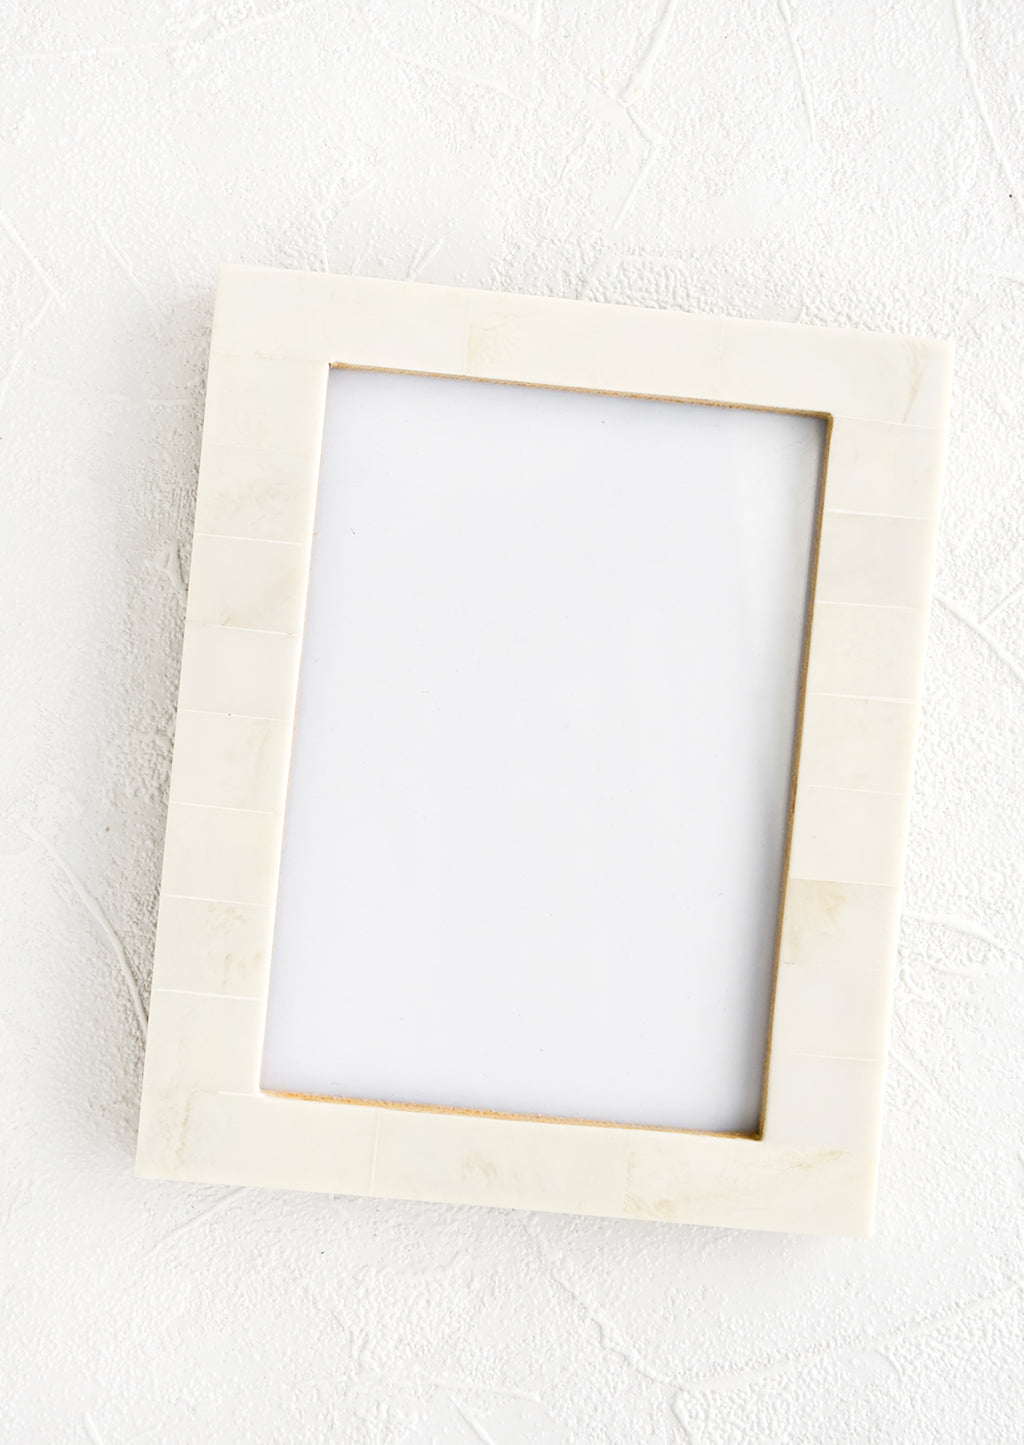 1: Picture frame designed for 5x7 photograph. Glass center with pale ivory border made from blocks of resin.